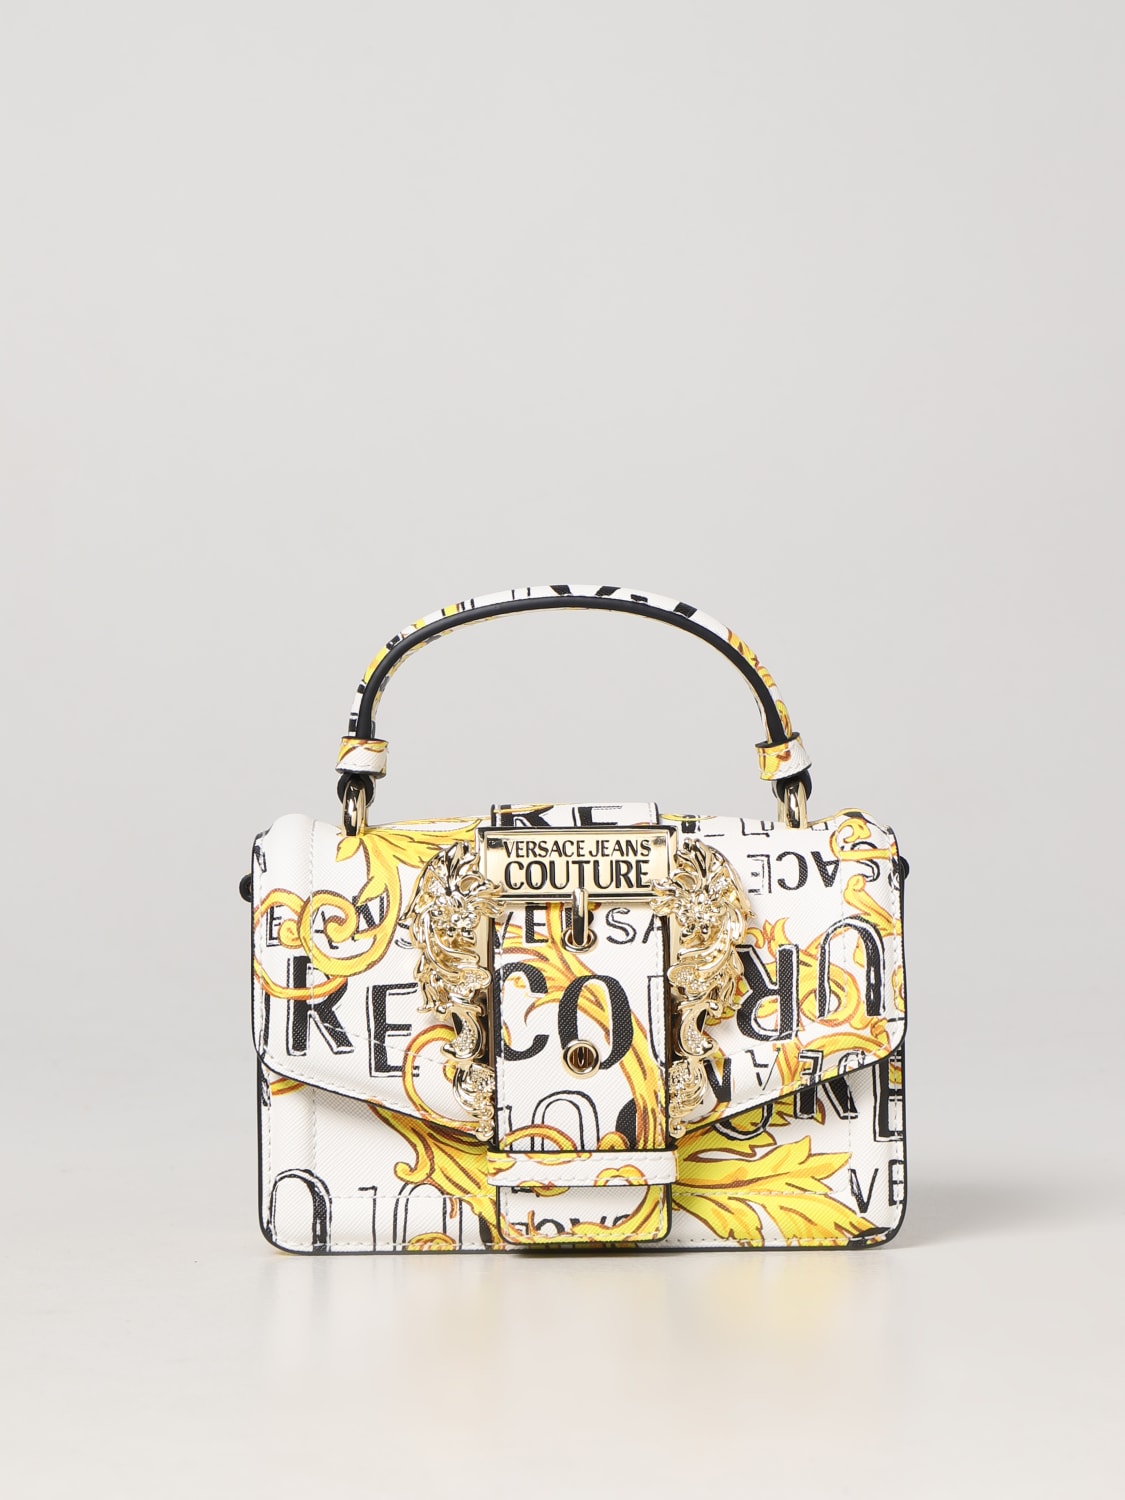 VERSACE JEANS COUTURE: Mini bolso para mujer, | Bolso Versace Jeans Couture 74VA4BF6ZS597 en en